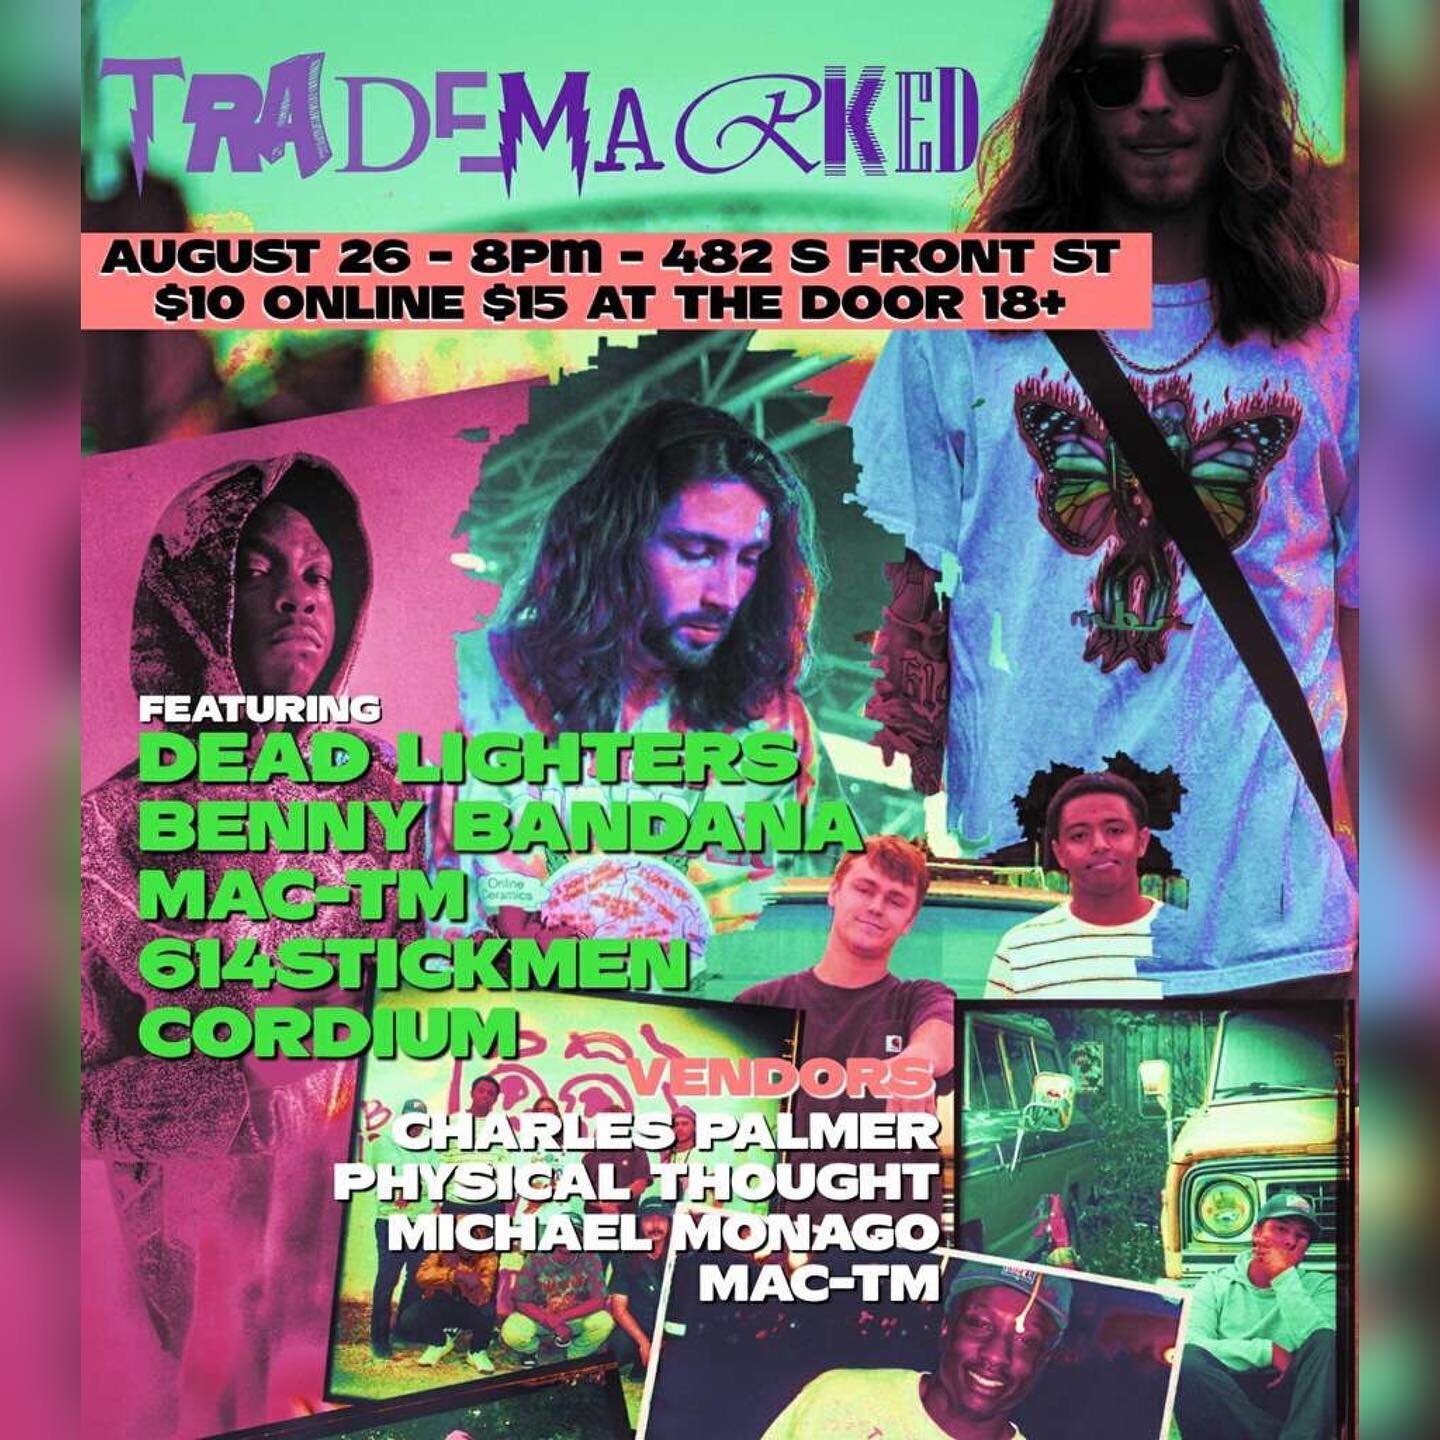 TM is back at it again💯

8/26 @ Double Happiness

me and the boys over at @tmtrademarkedtm hosting a multi genre music and arts showcase with some of the most fire underground artists in columbus 

peep my bio and website for tickets‼️